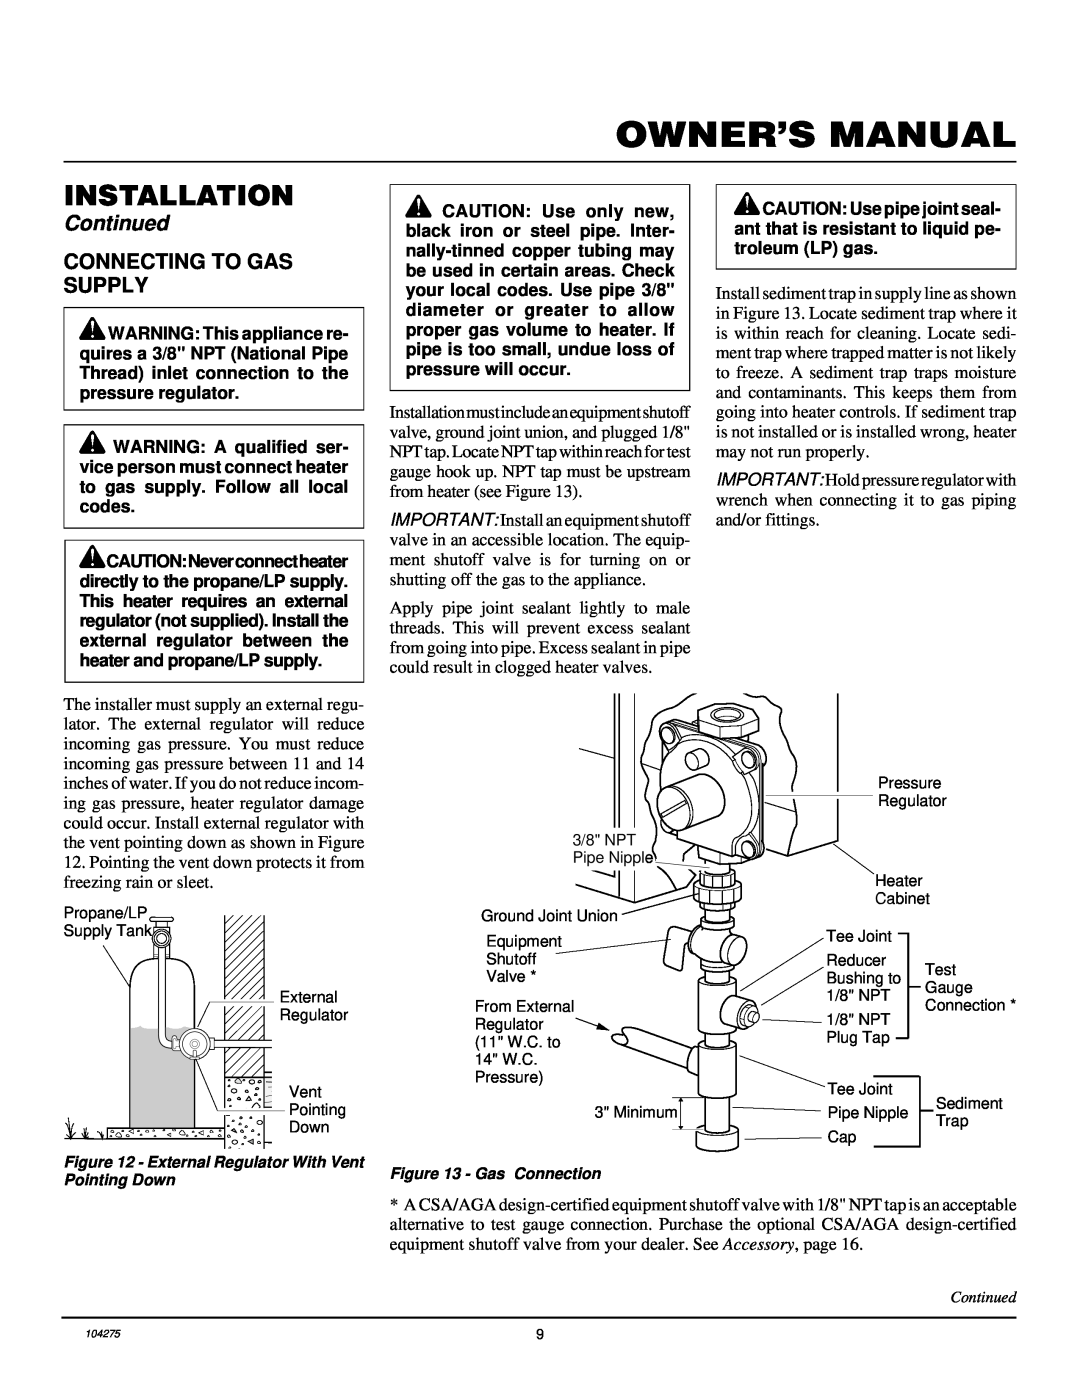 Desa CGP10RLA installation manual Installation, Continued, Connecting To Gas Supply, Gas Connection 